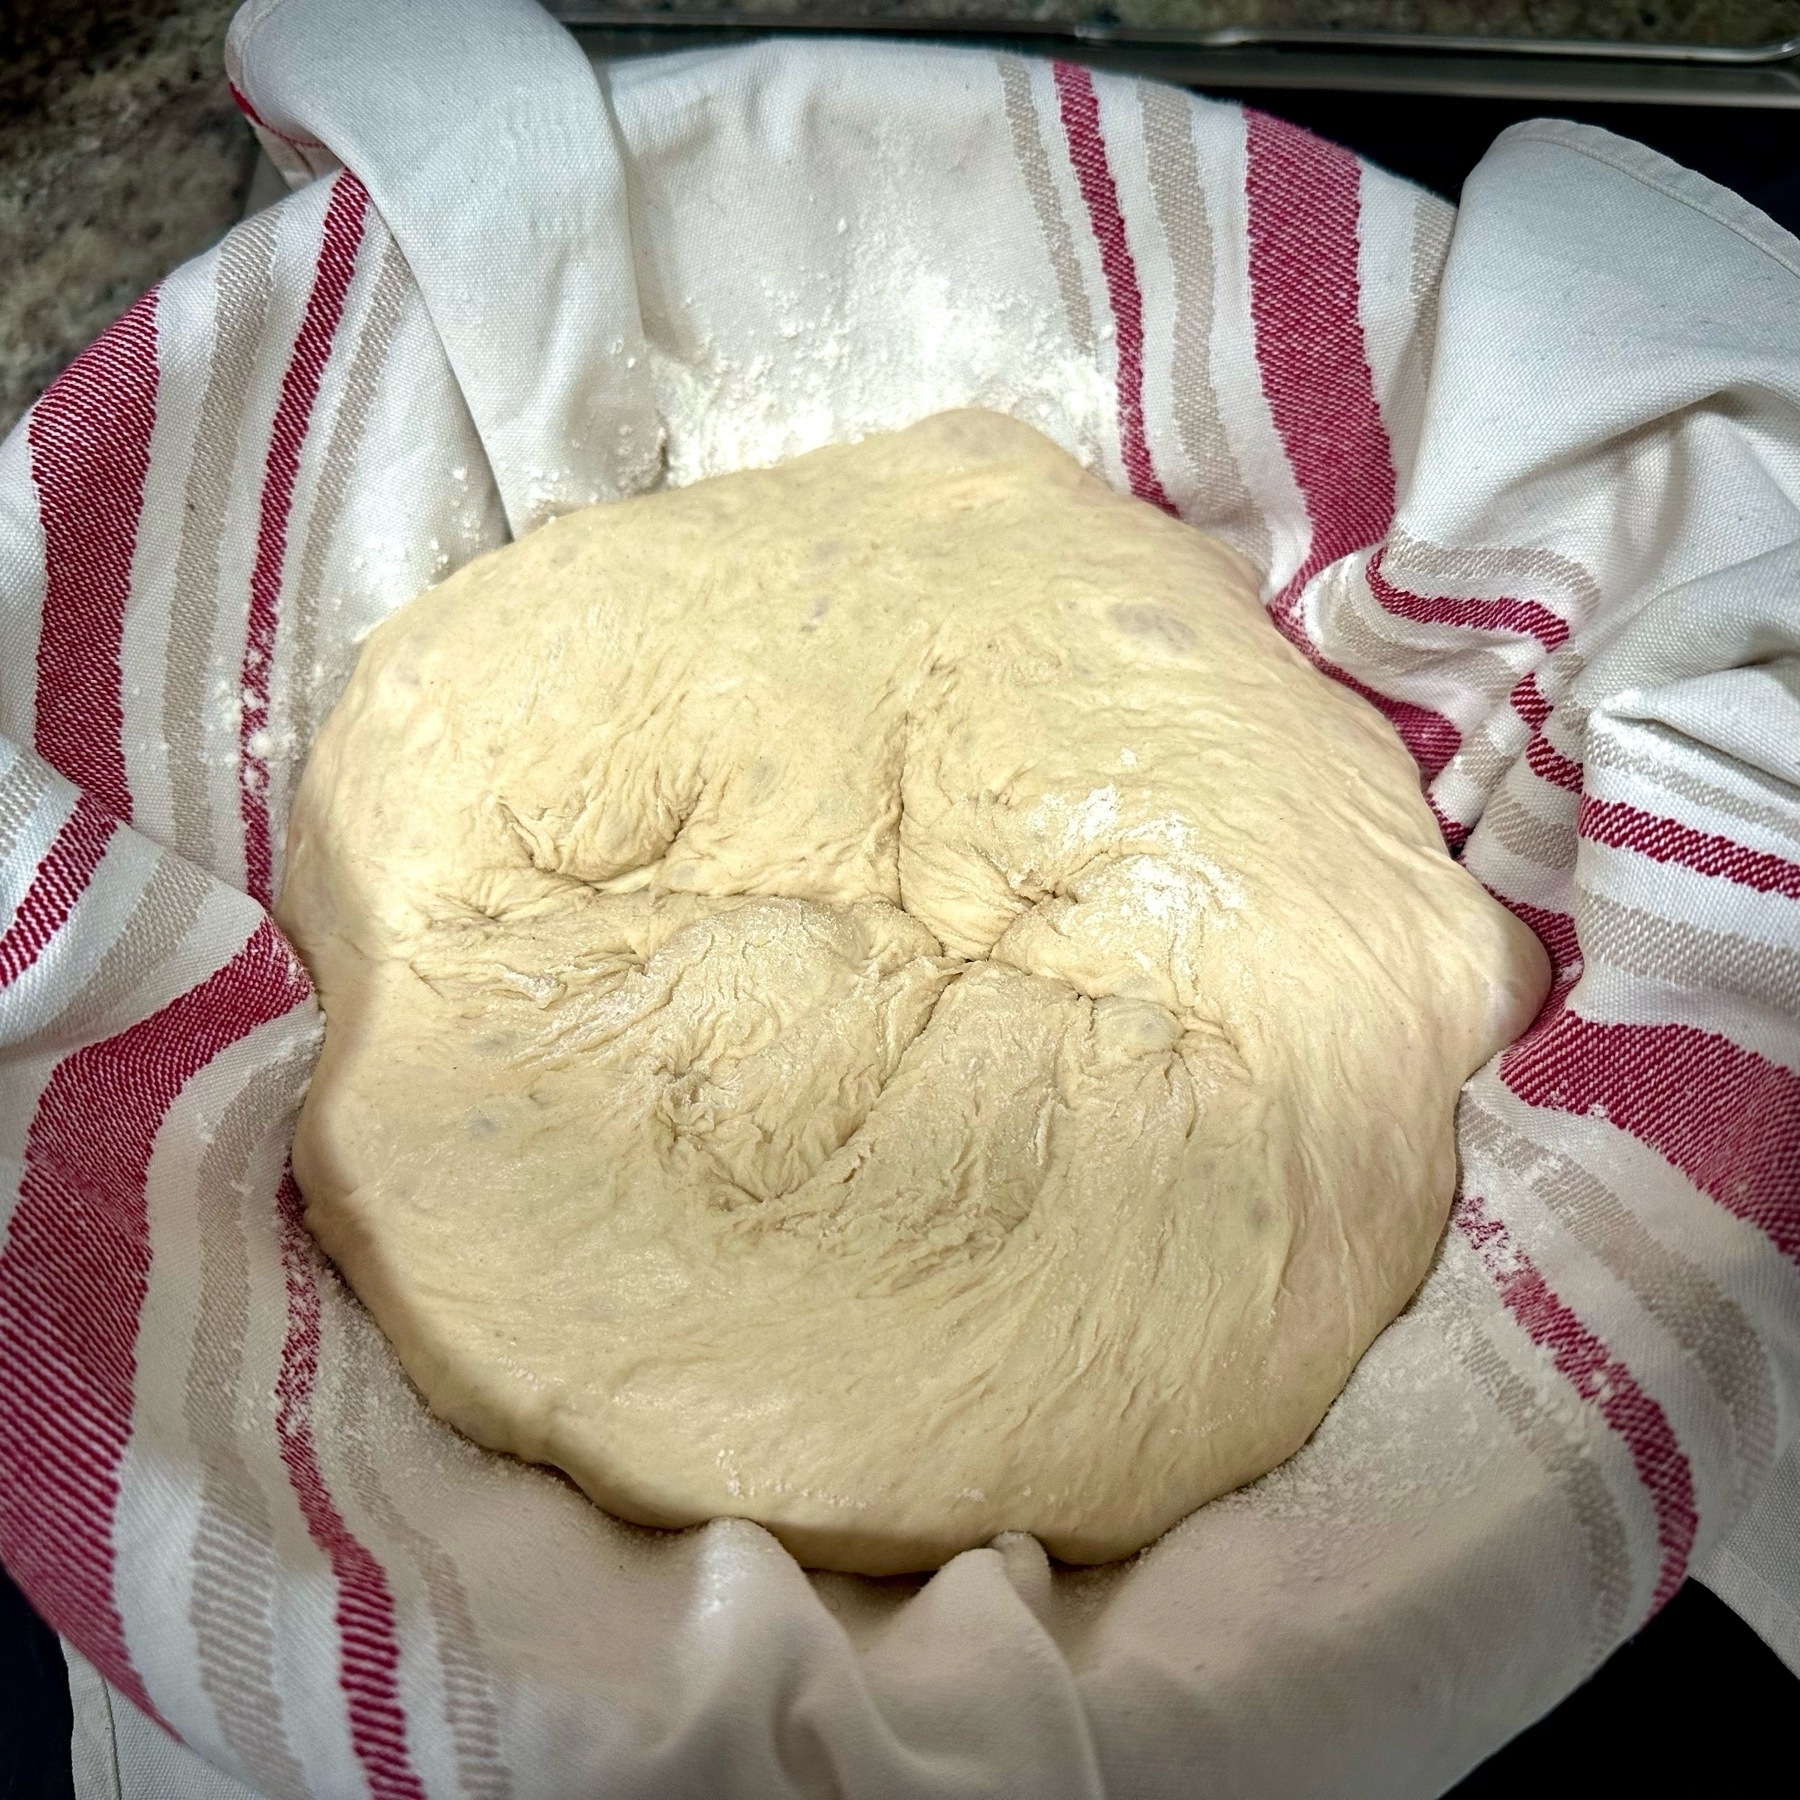 Dough sitting in a bowl